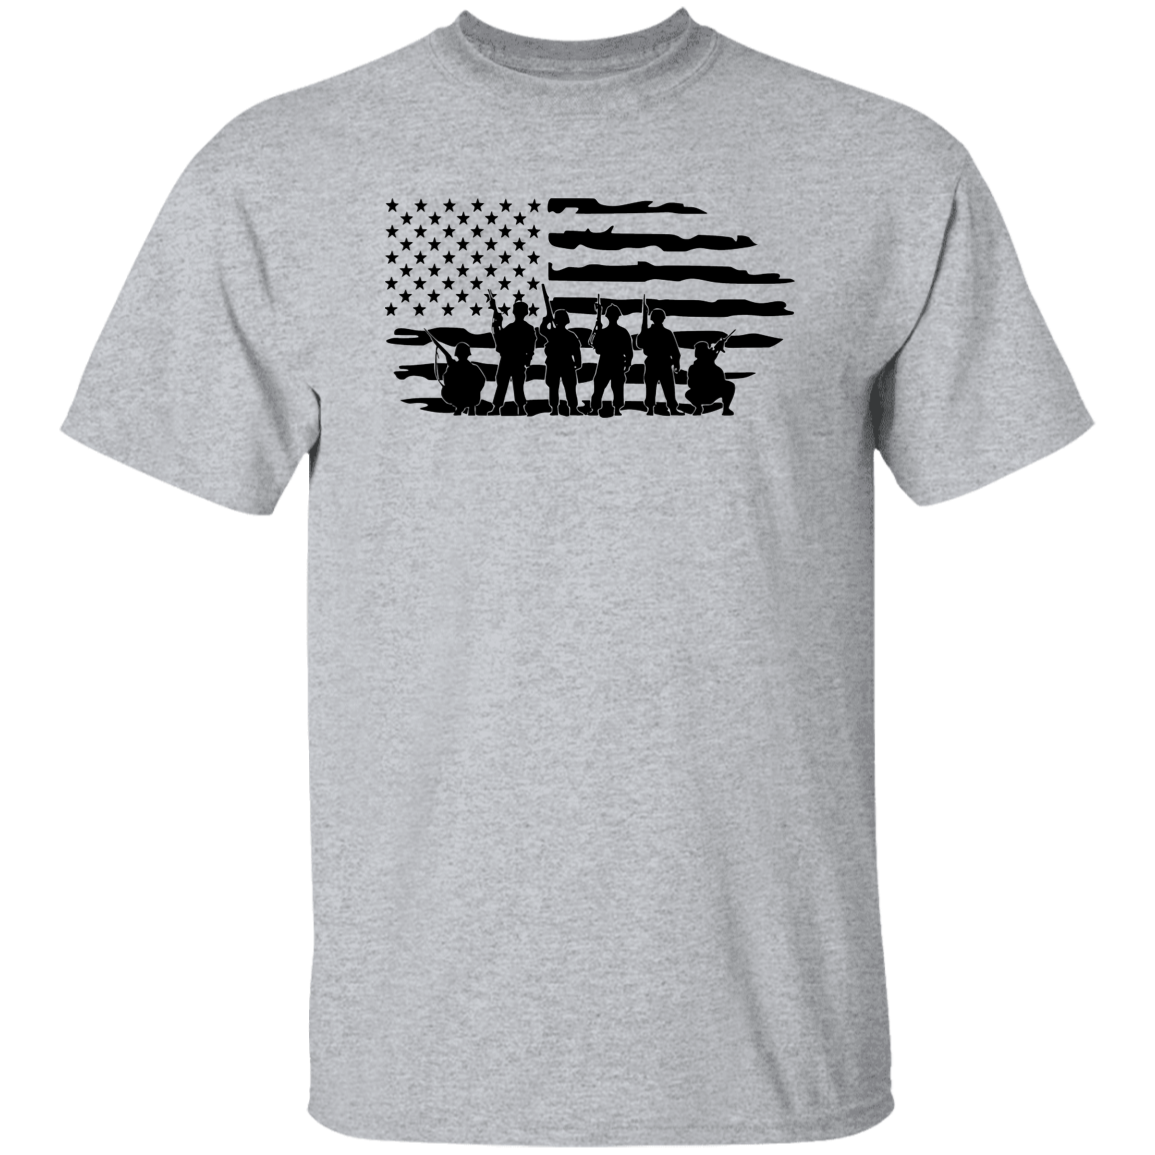 Brothers in Arms Shirt